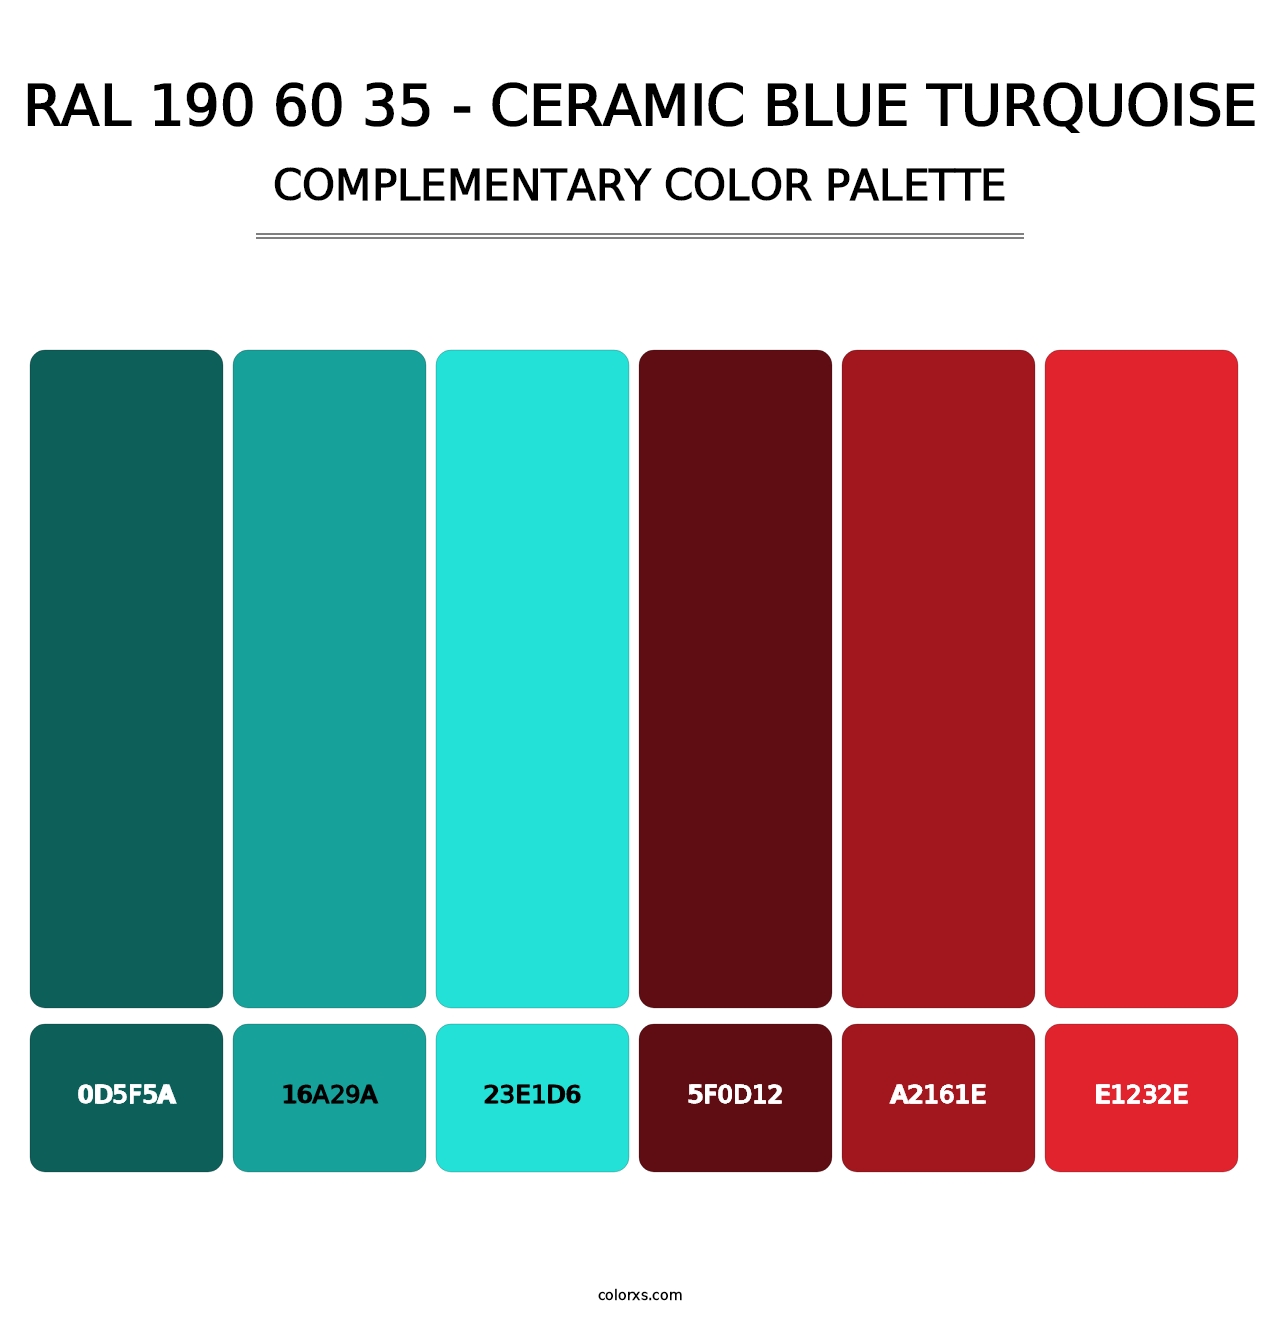 RAL 190 60 35 - Ceramic Blue Turquoise - Complementary Color Palette